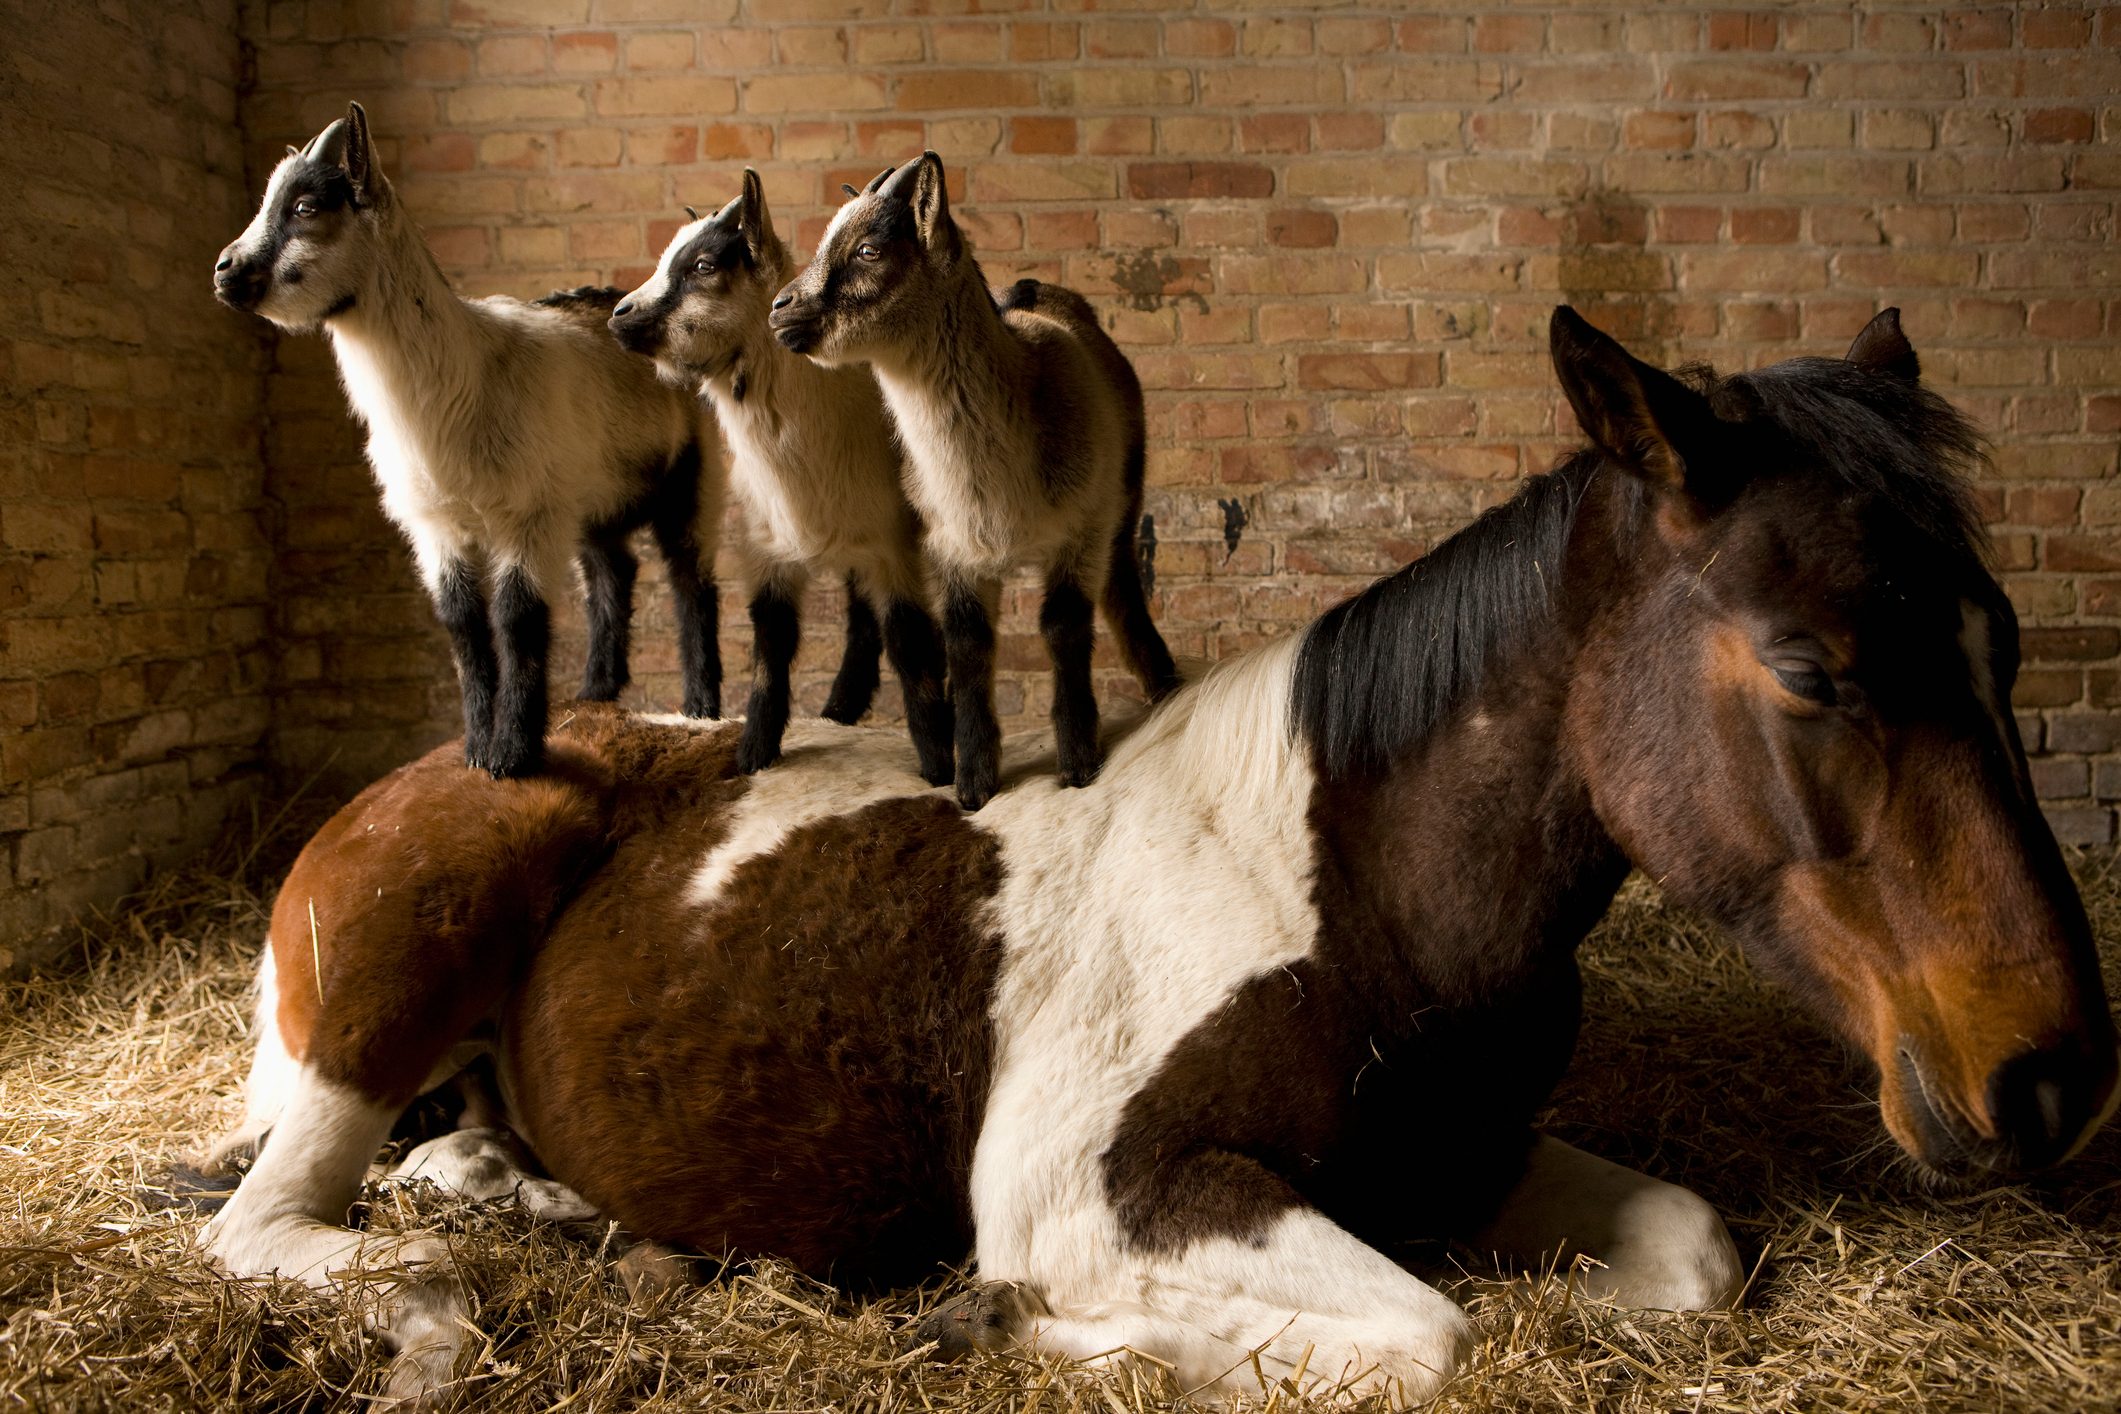 Young goats standing on horse in stable